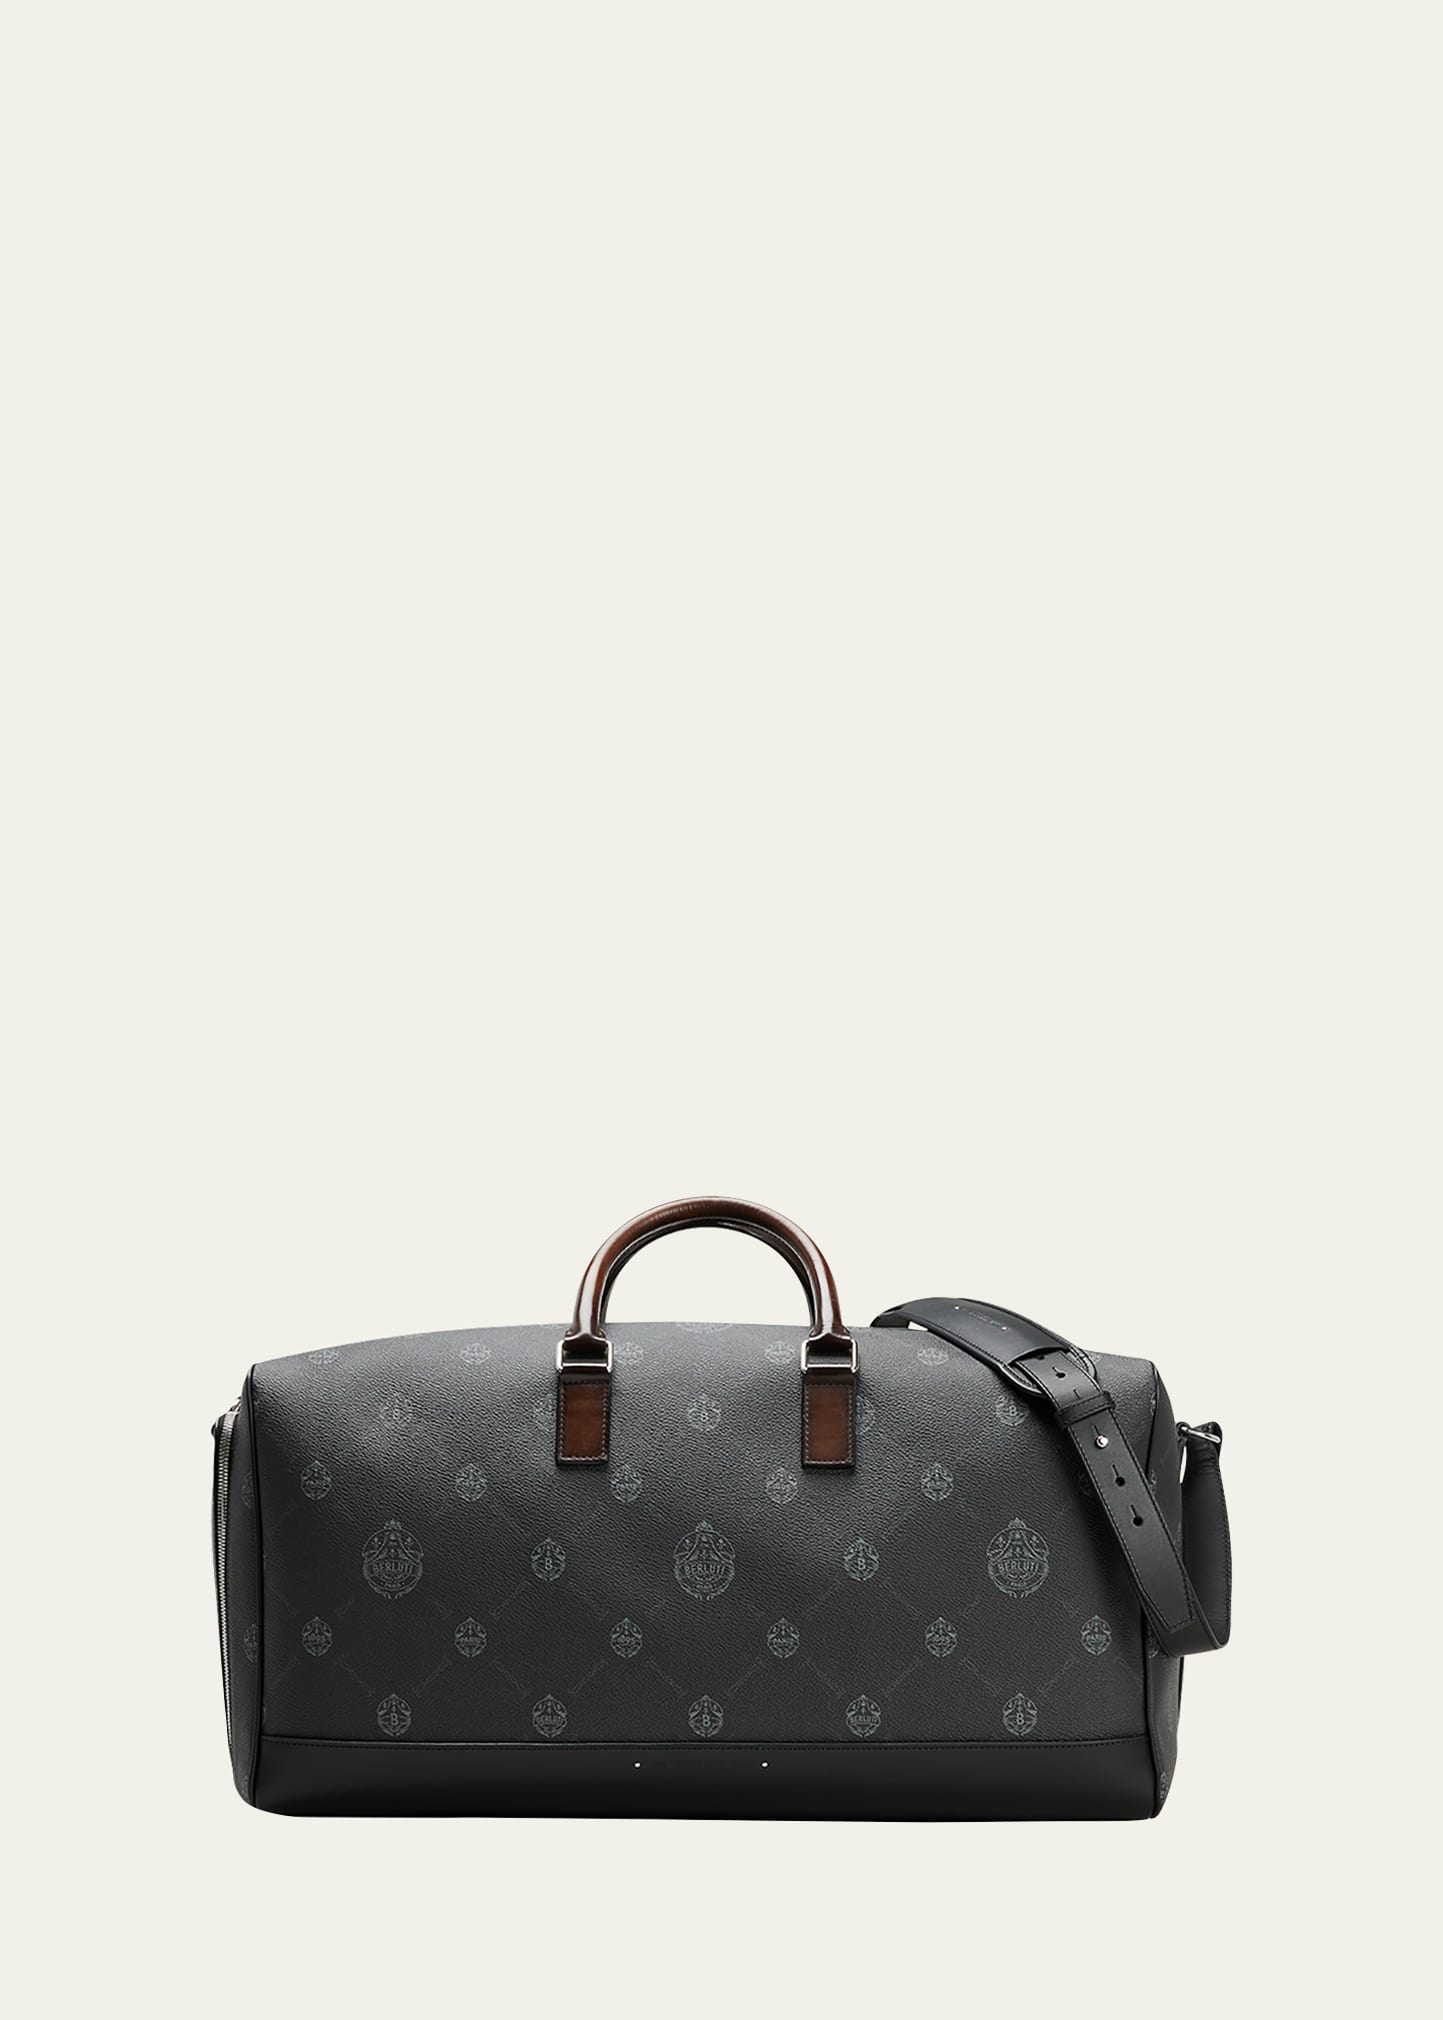 THE ADVENTURE OF SHOPPING WITH LOUIS VUITTON